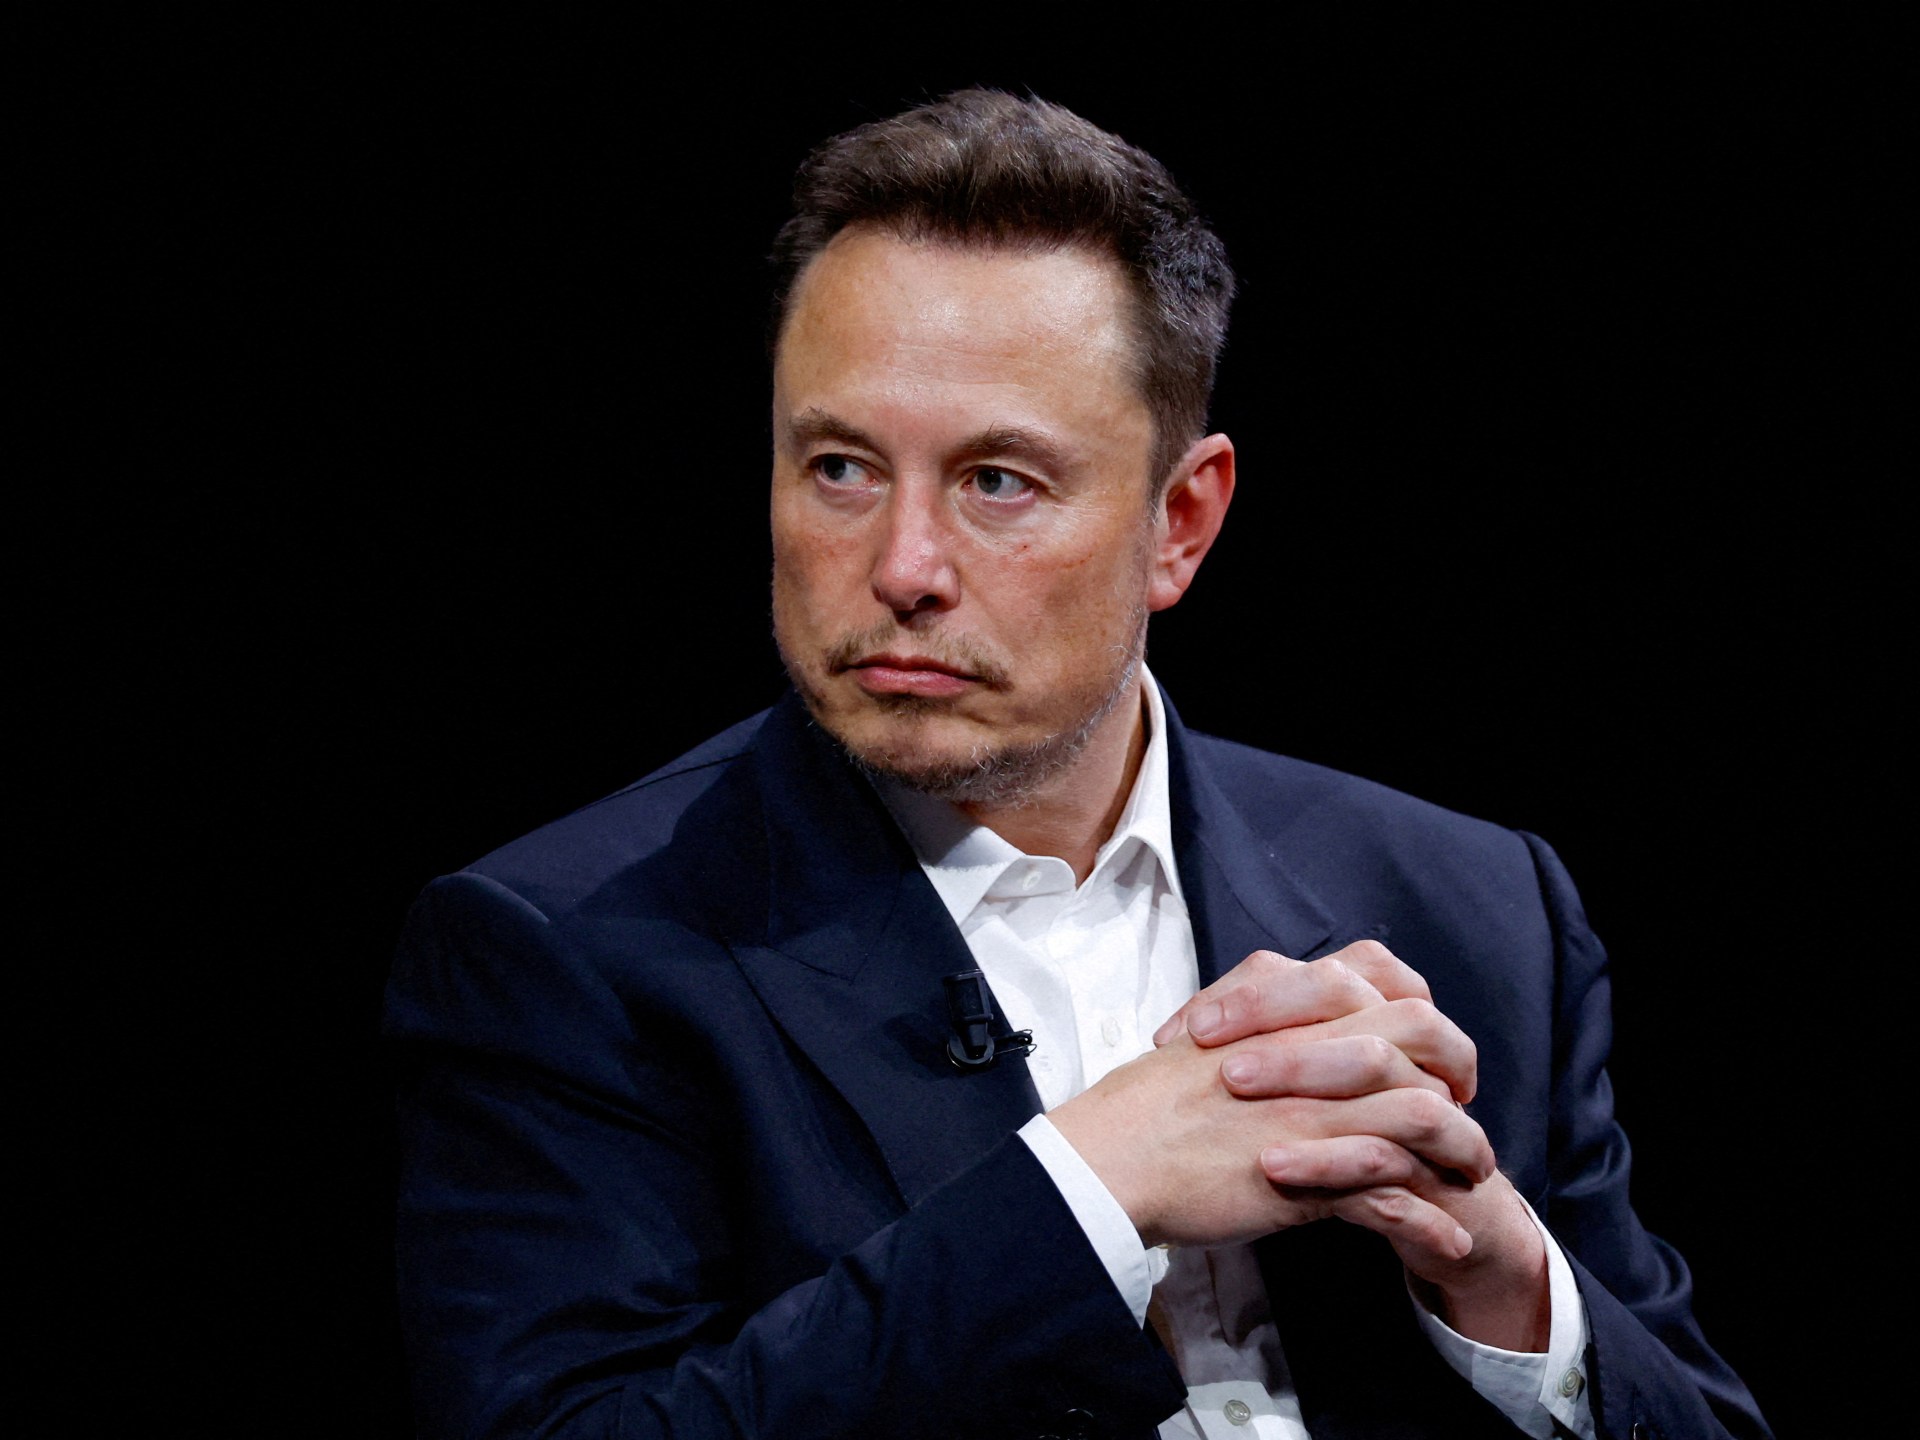 Musk’s crude message to advertisers | Israel-Palestine conflict News